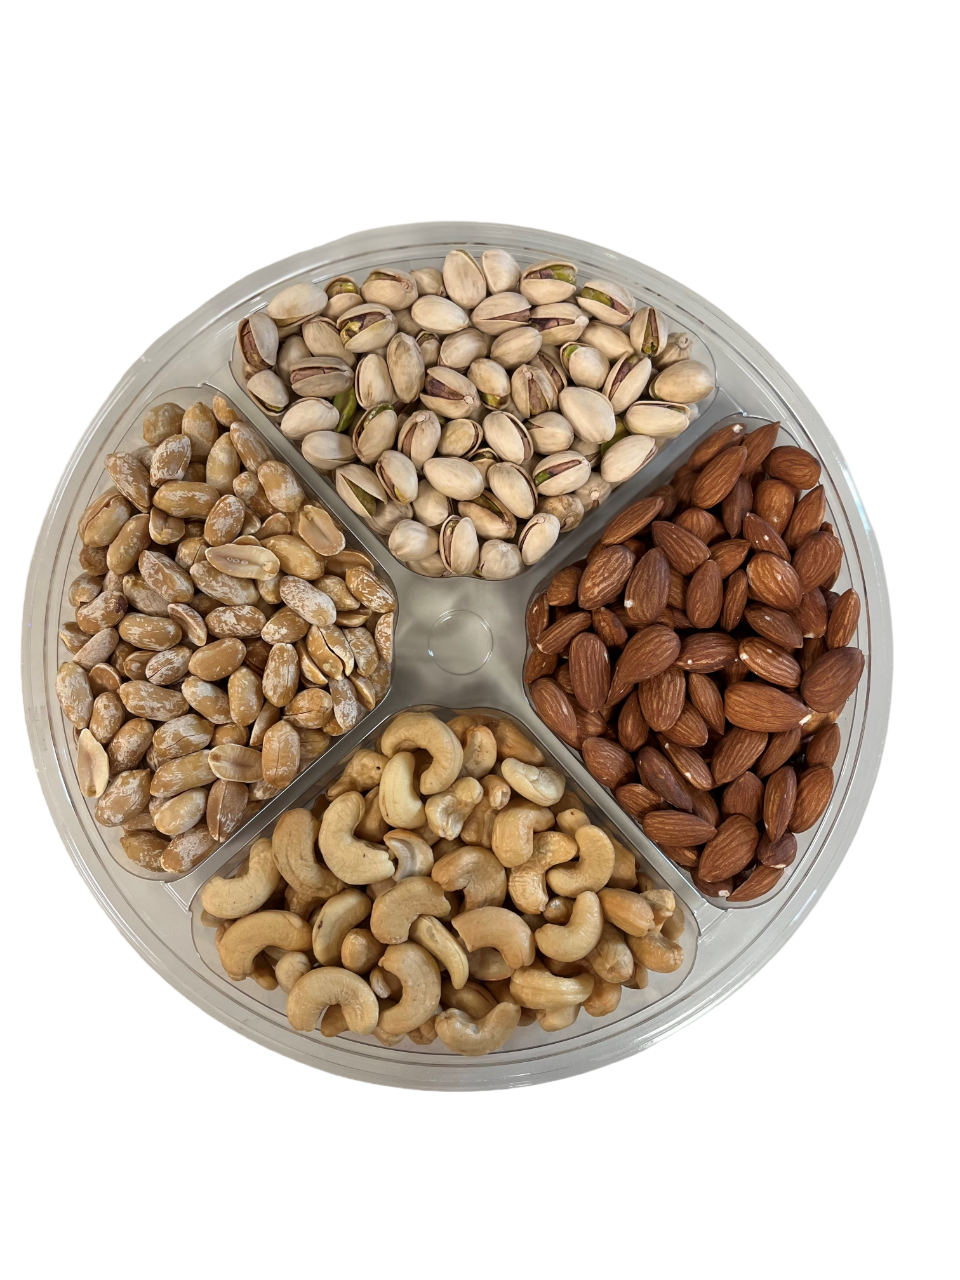 Assorted Nut Tray (Unsalted Variety)